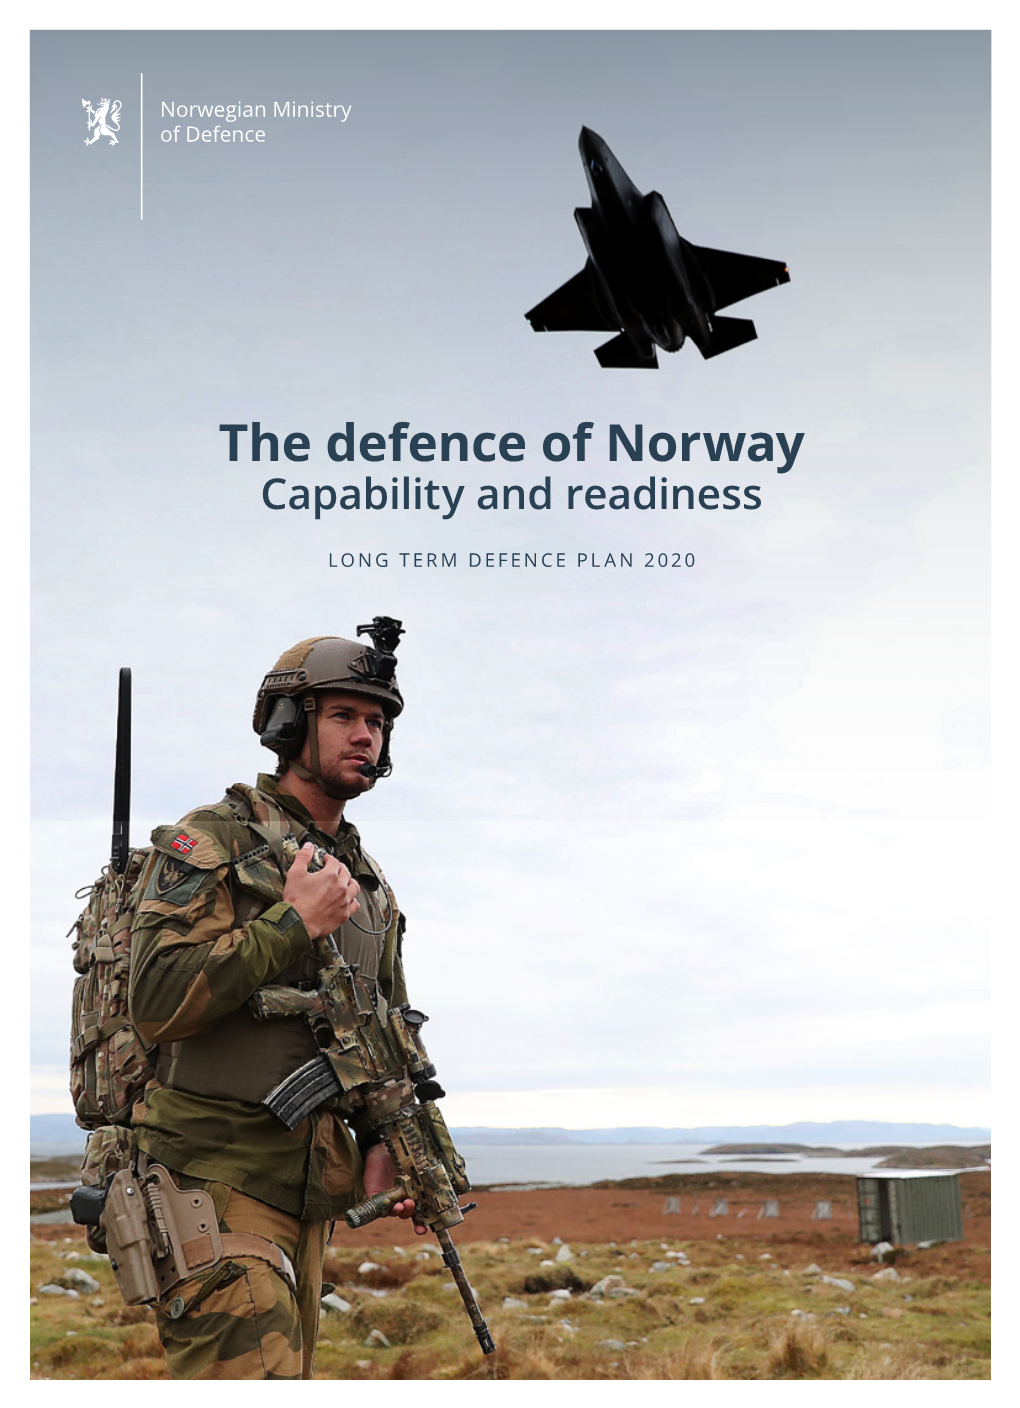 The Defence of Norway Capability and Readiness